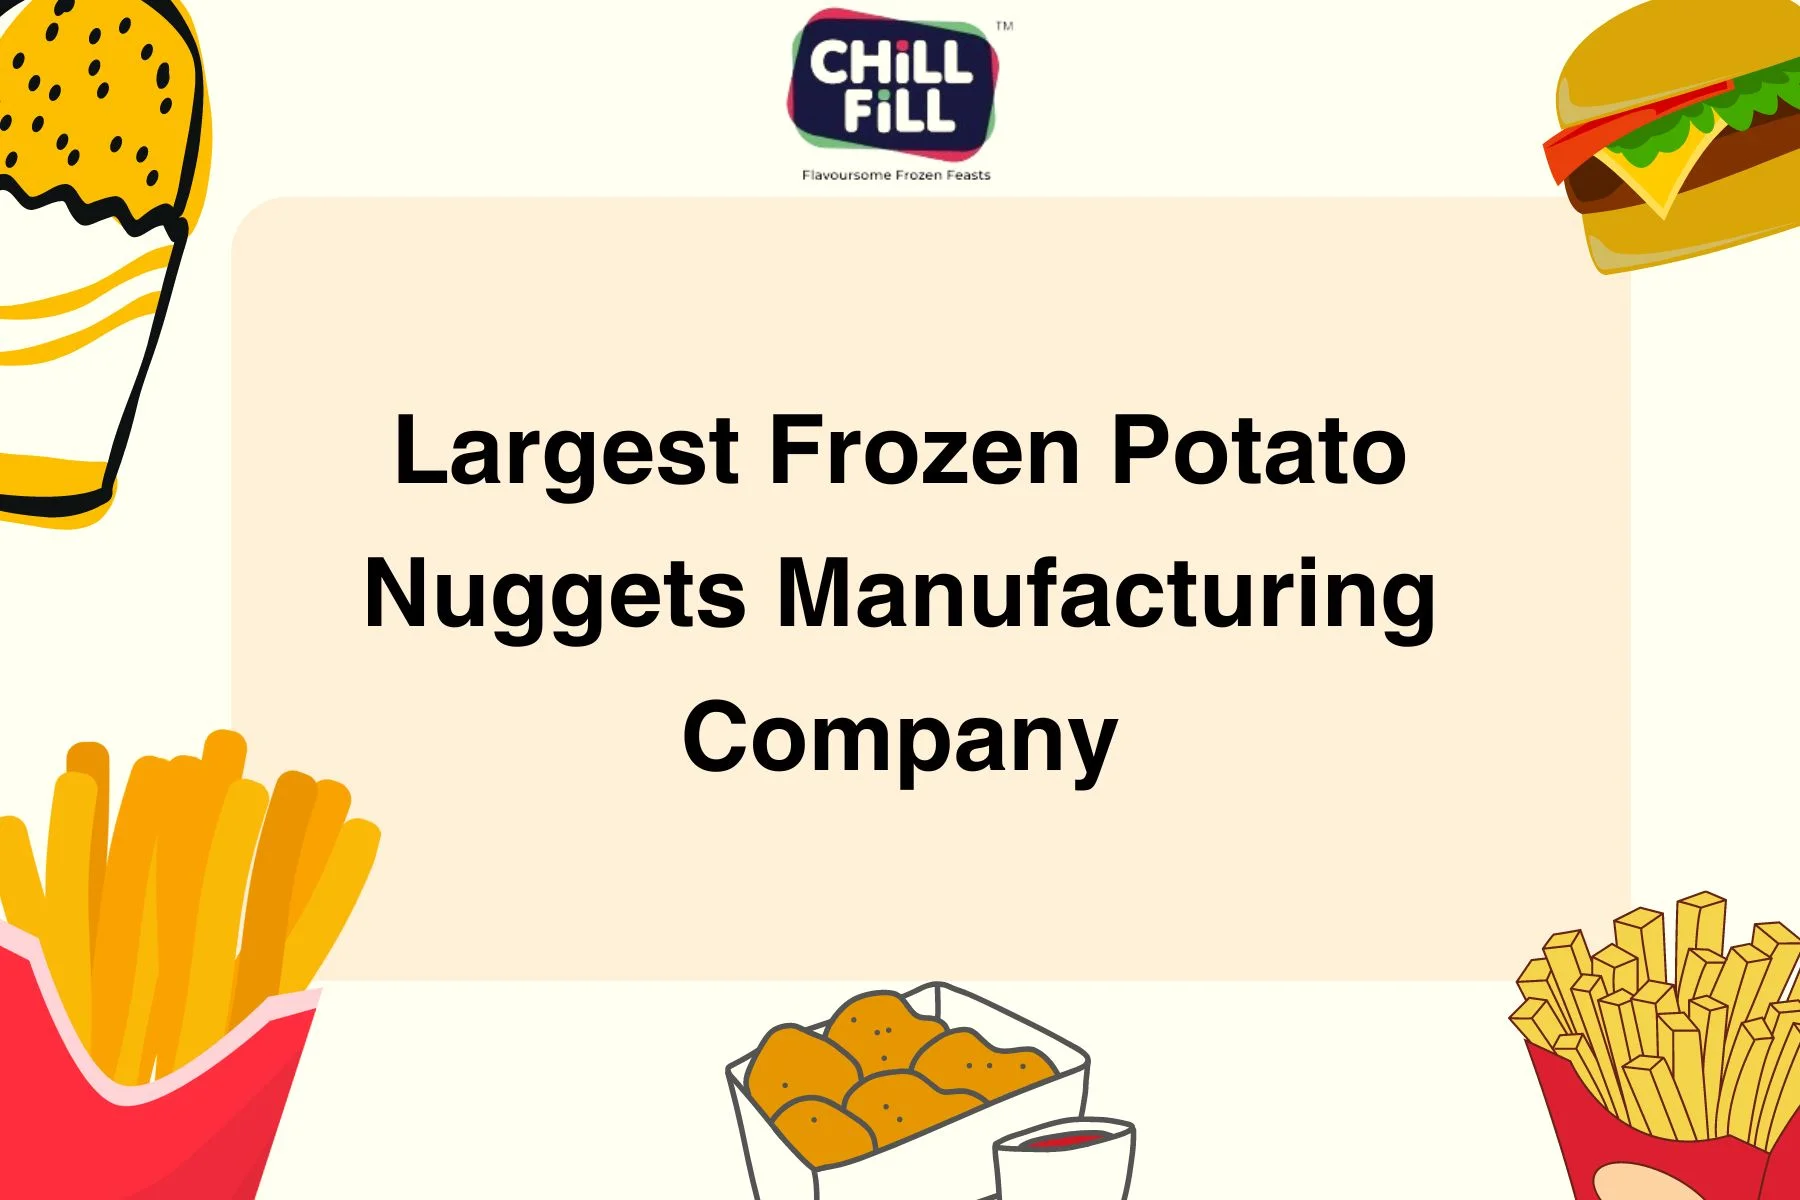 Largest Frozen Potato Nuggets Manufacturing Company